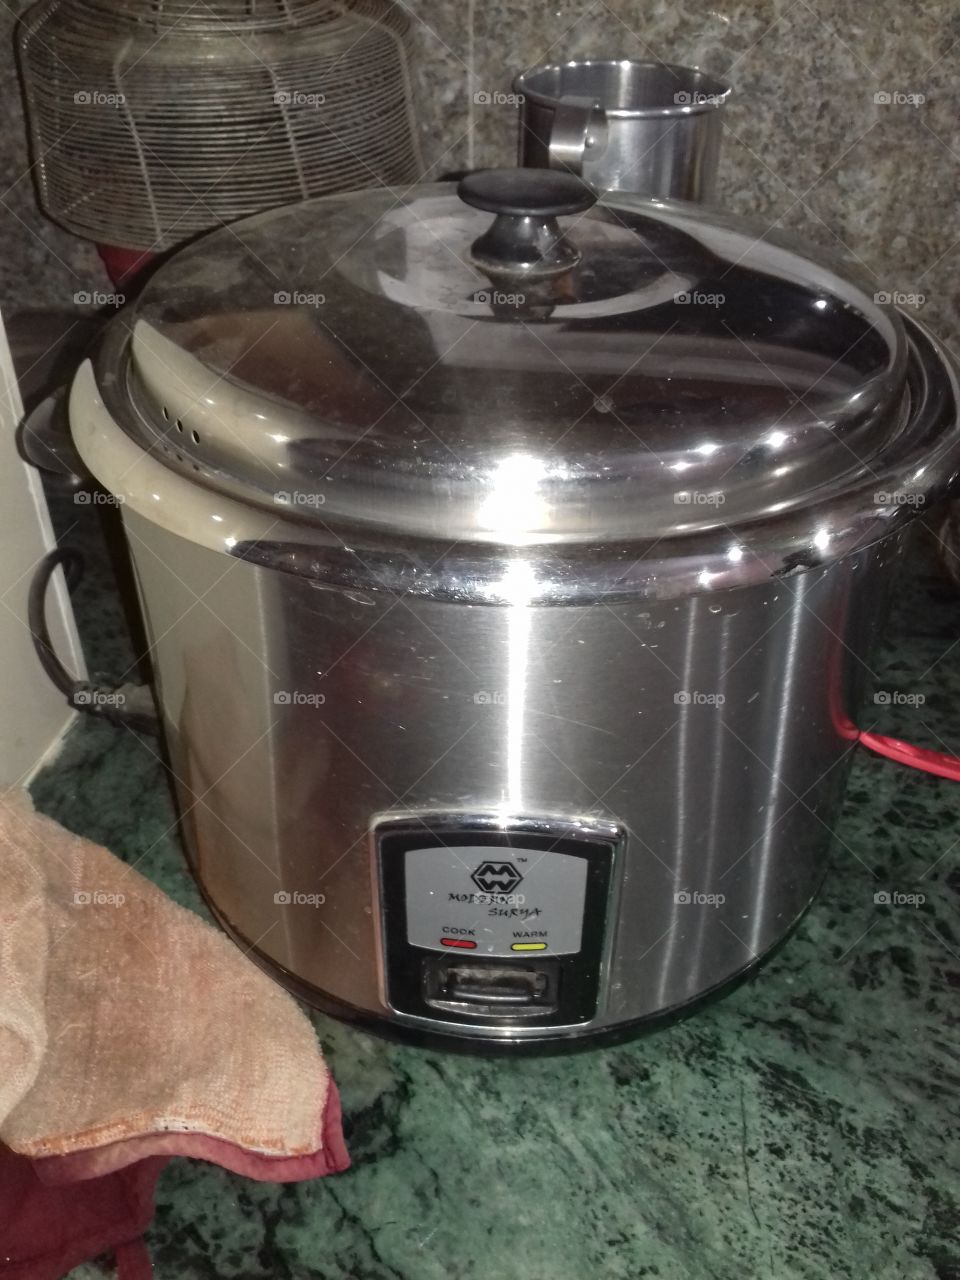 electric rice cooker made of stainless steel where reflection due to light and tiny scintillation are seen at certain places